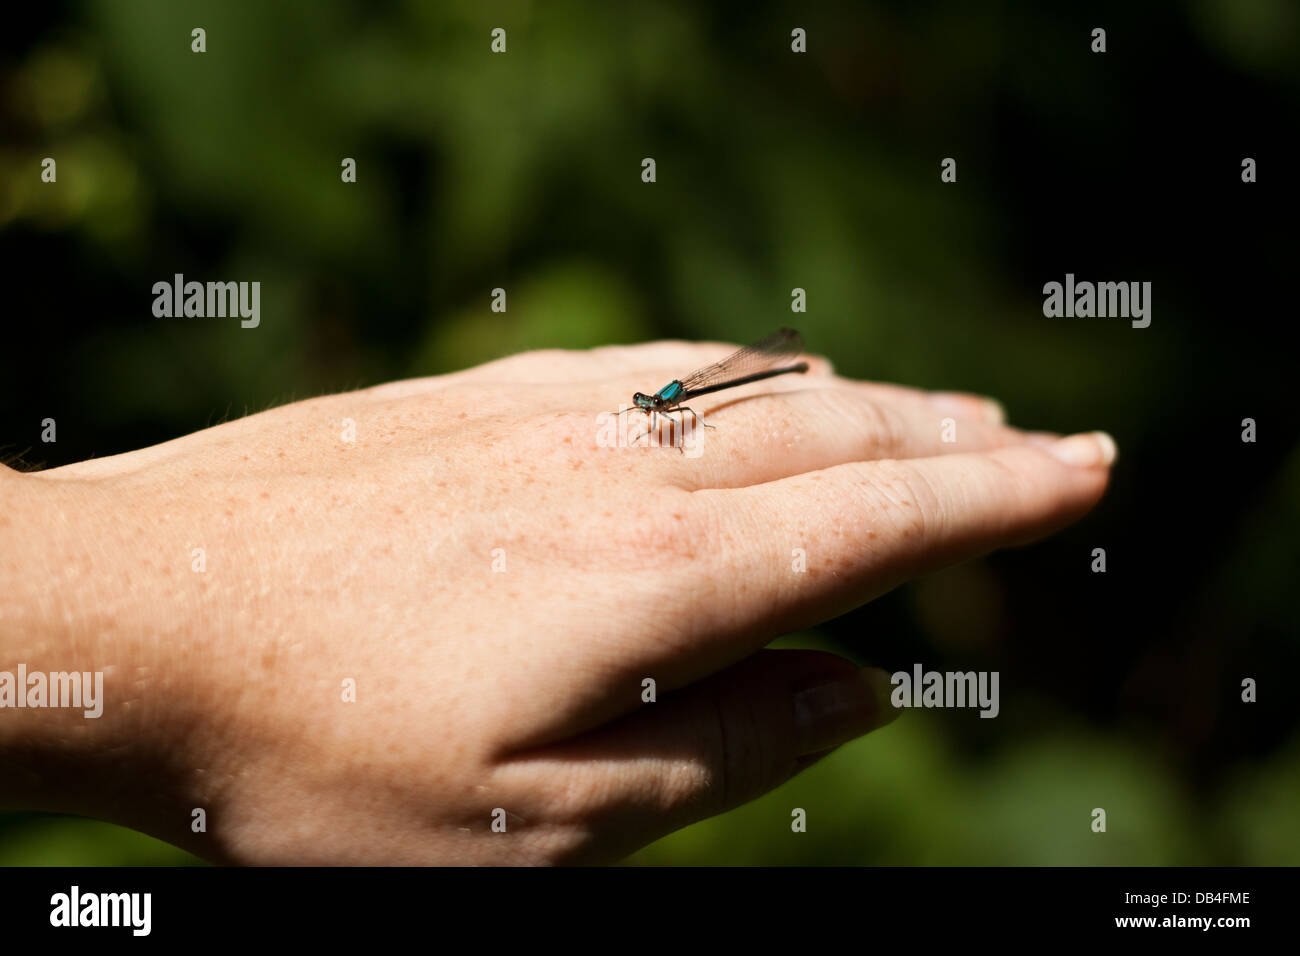 Damselfly resting on person's hand Stock Photo